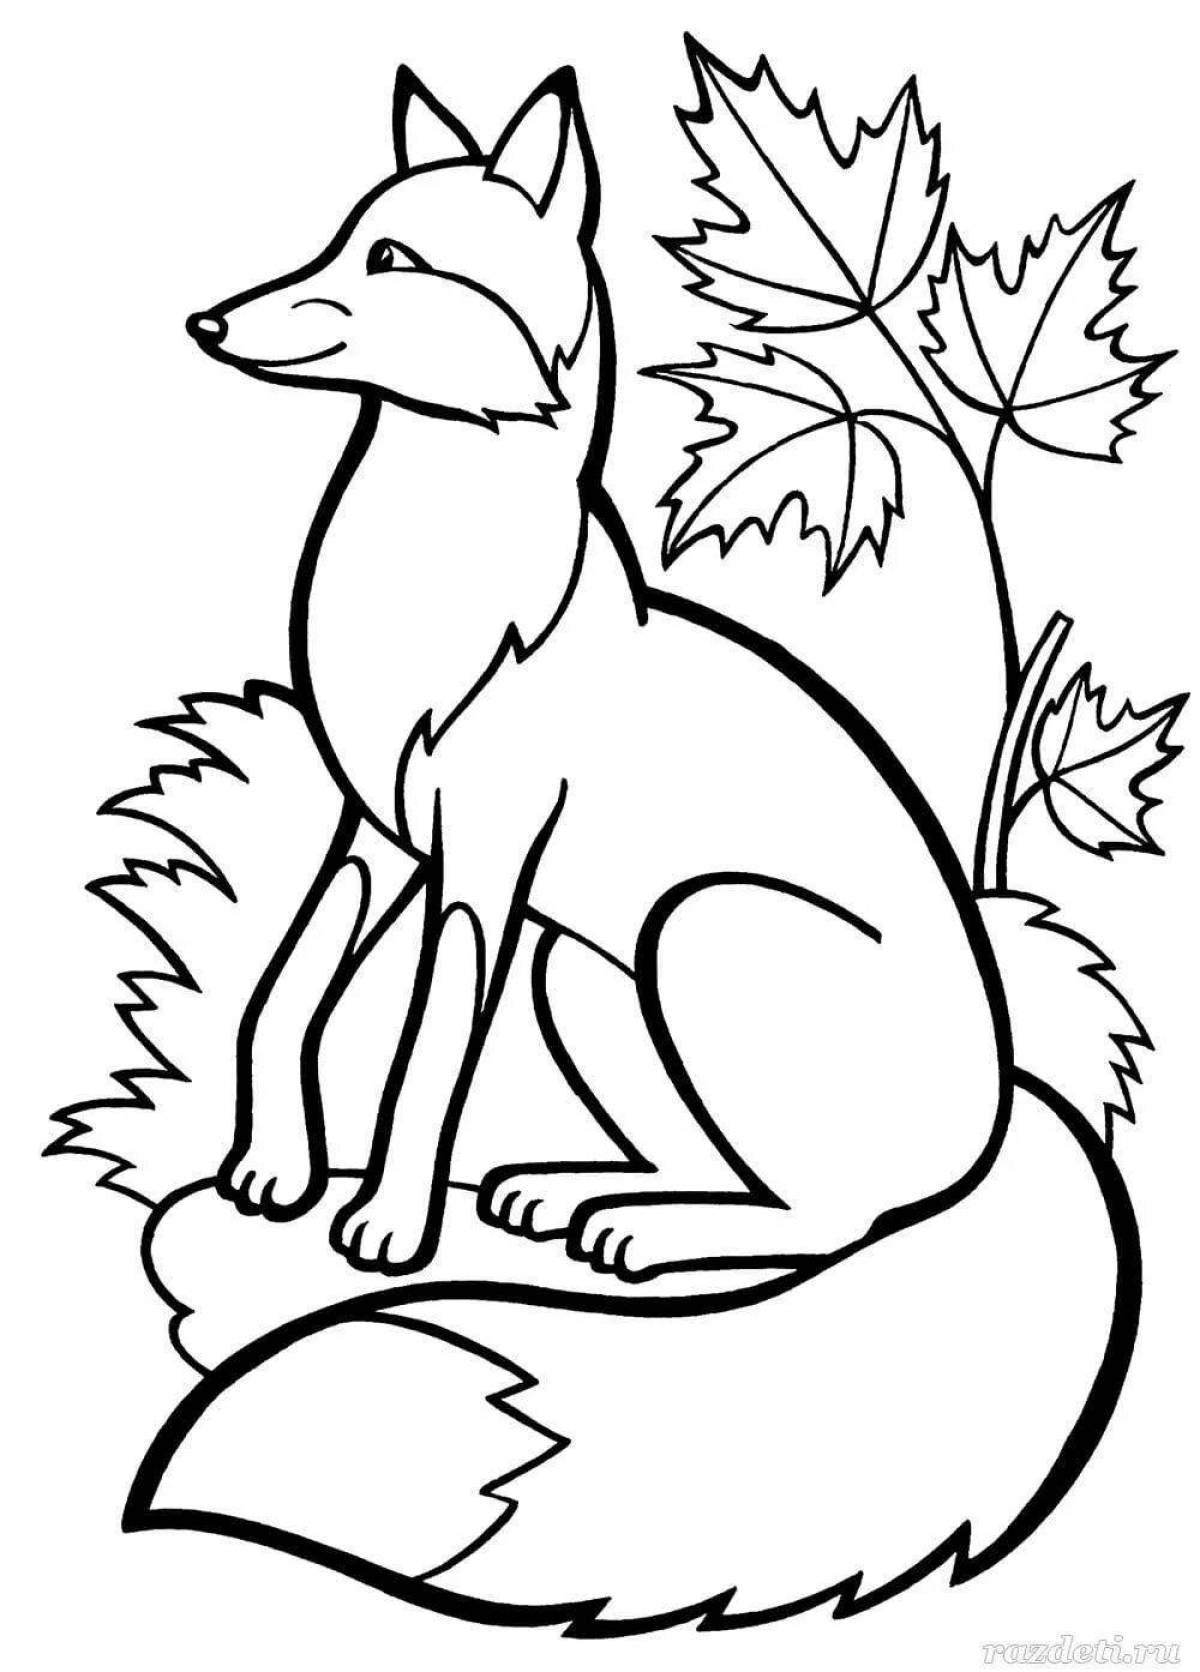 Coloring fox for children 4-5 years old